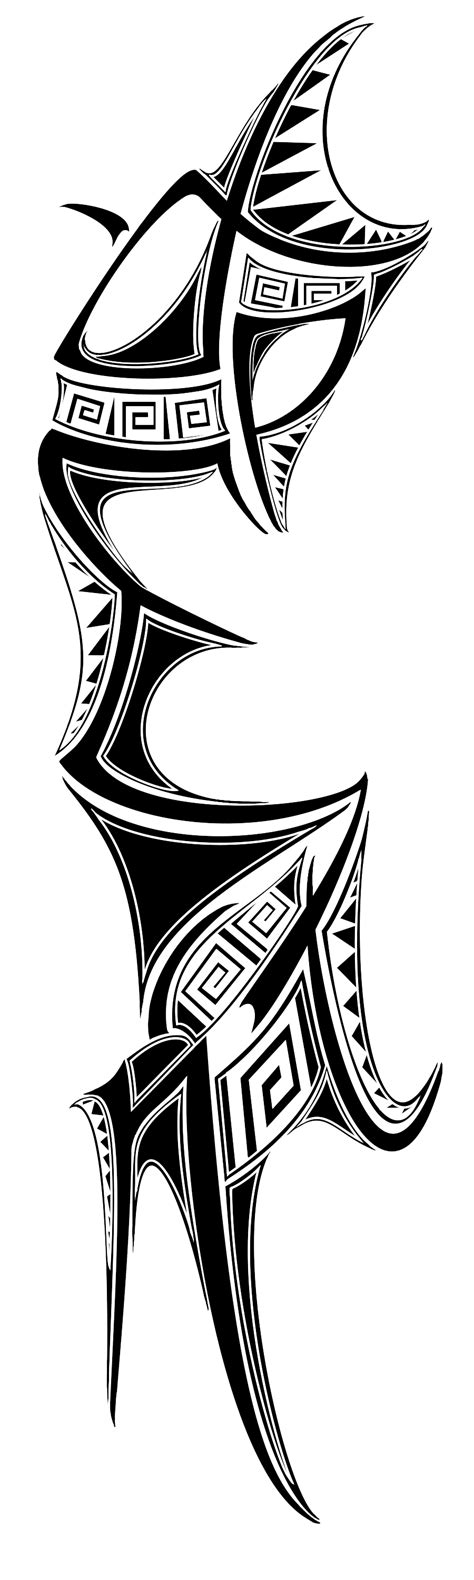 0 Result Images Of Tattoo Sleeve Png Transparent Png Image Collection